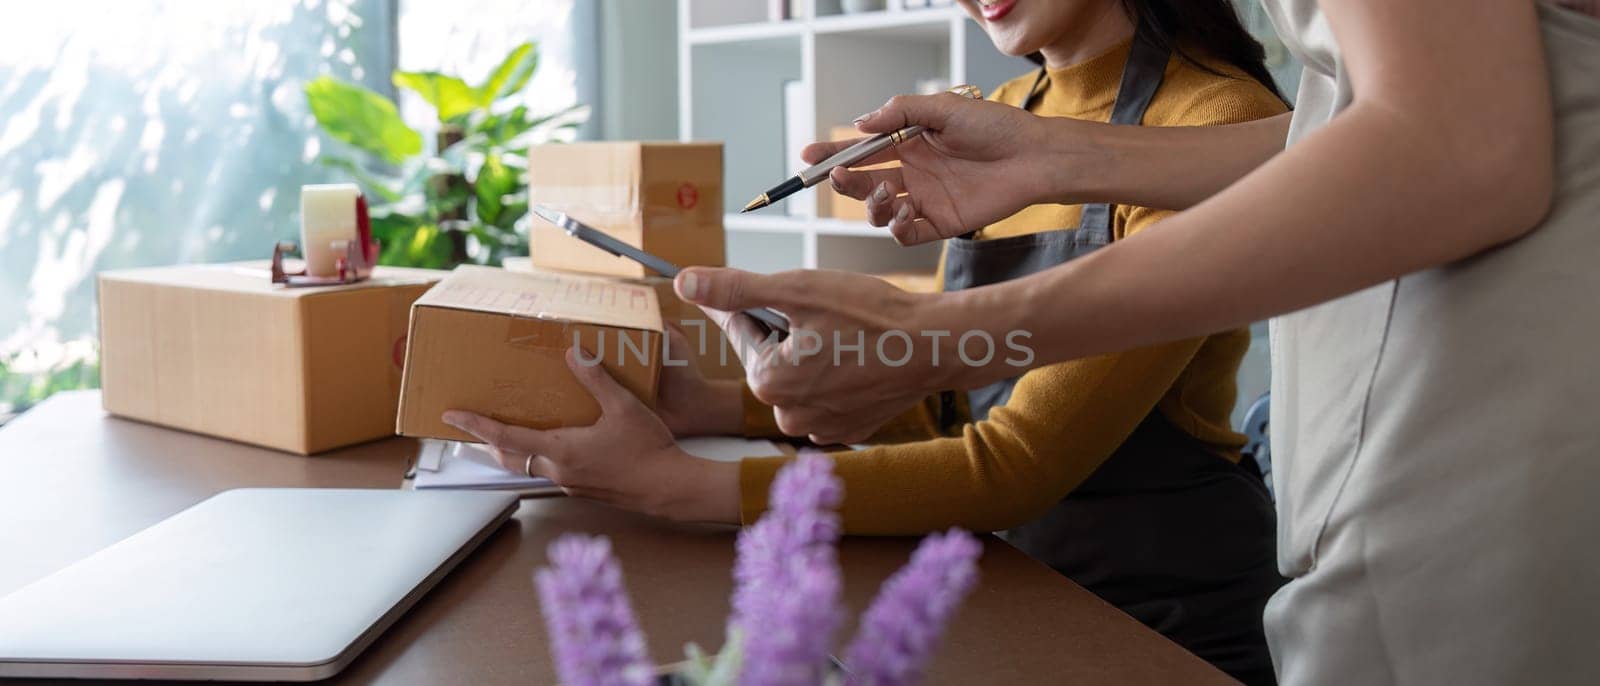 Entrepreneurs preparing packages in a bright home office by nateemee